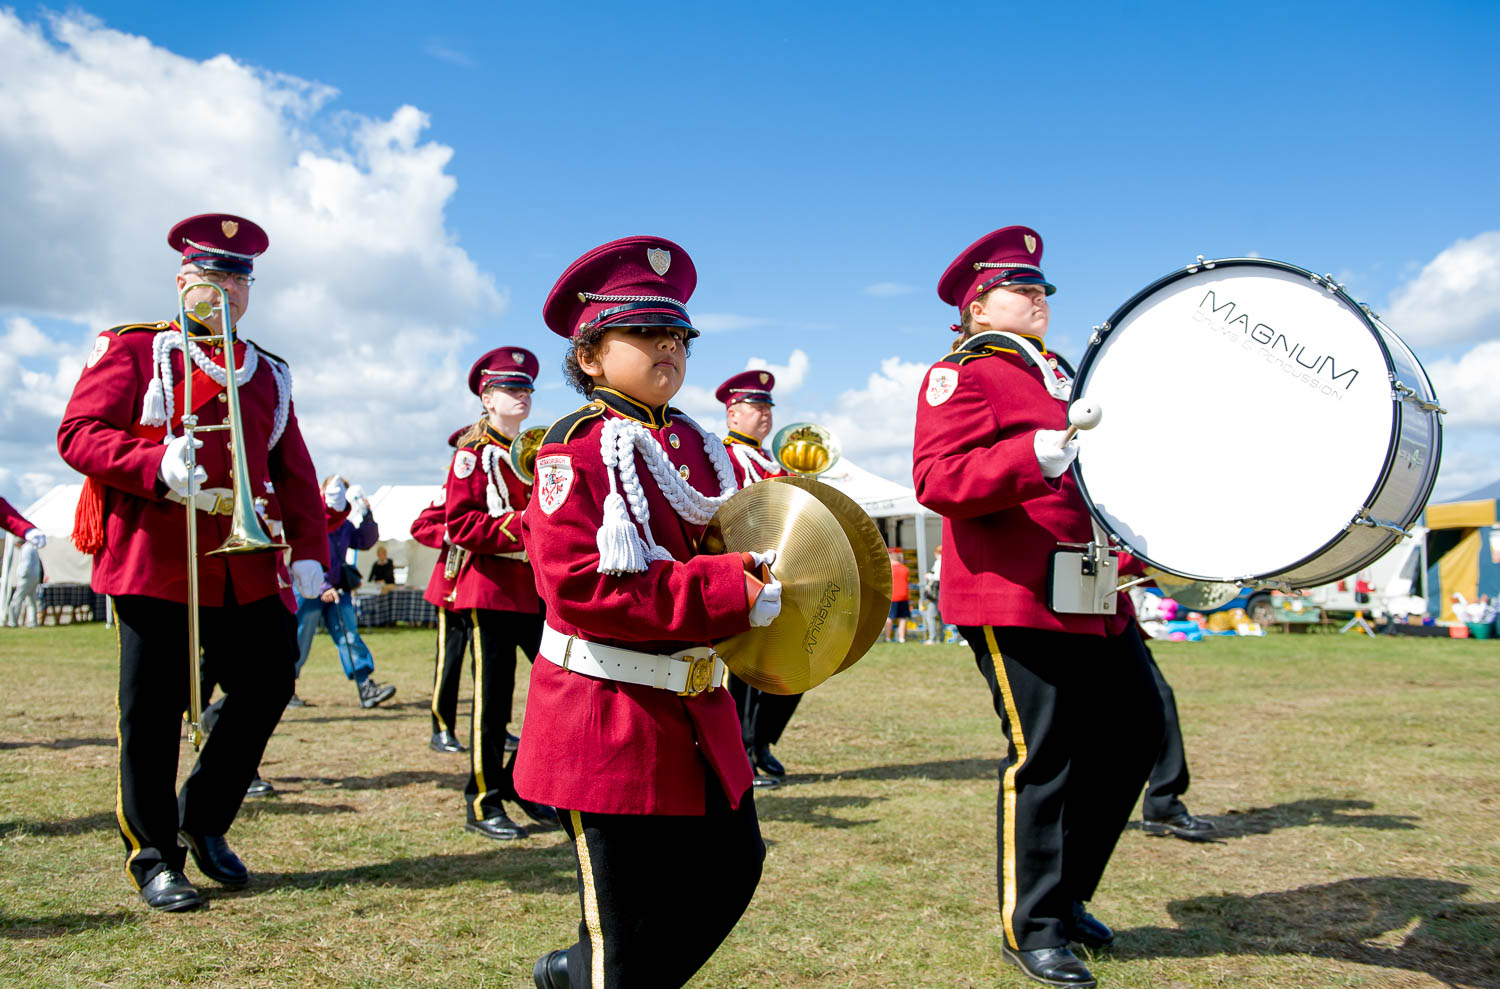  Marching band, re-enactment event, Essex 